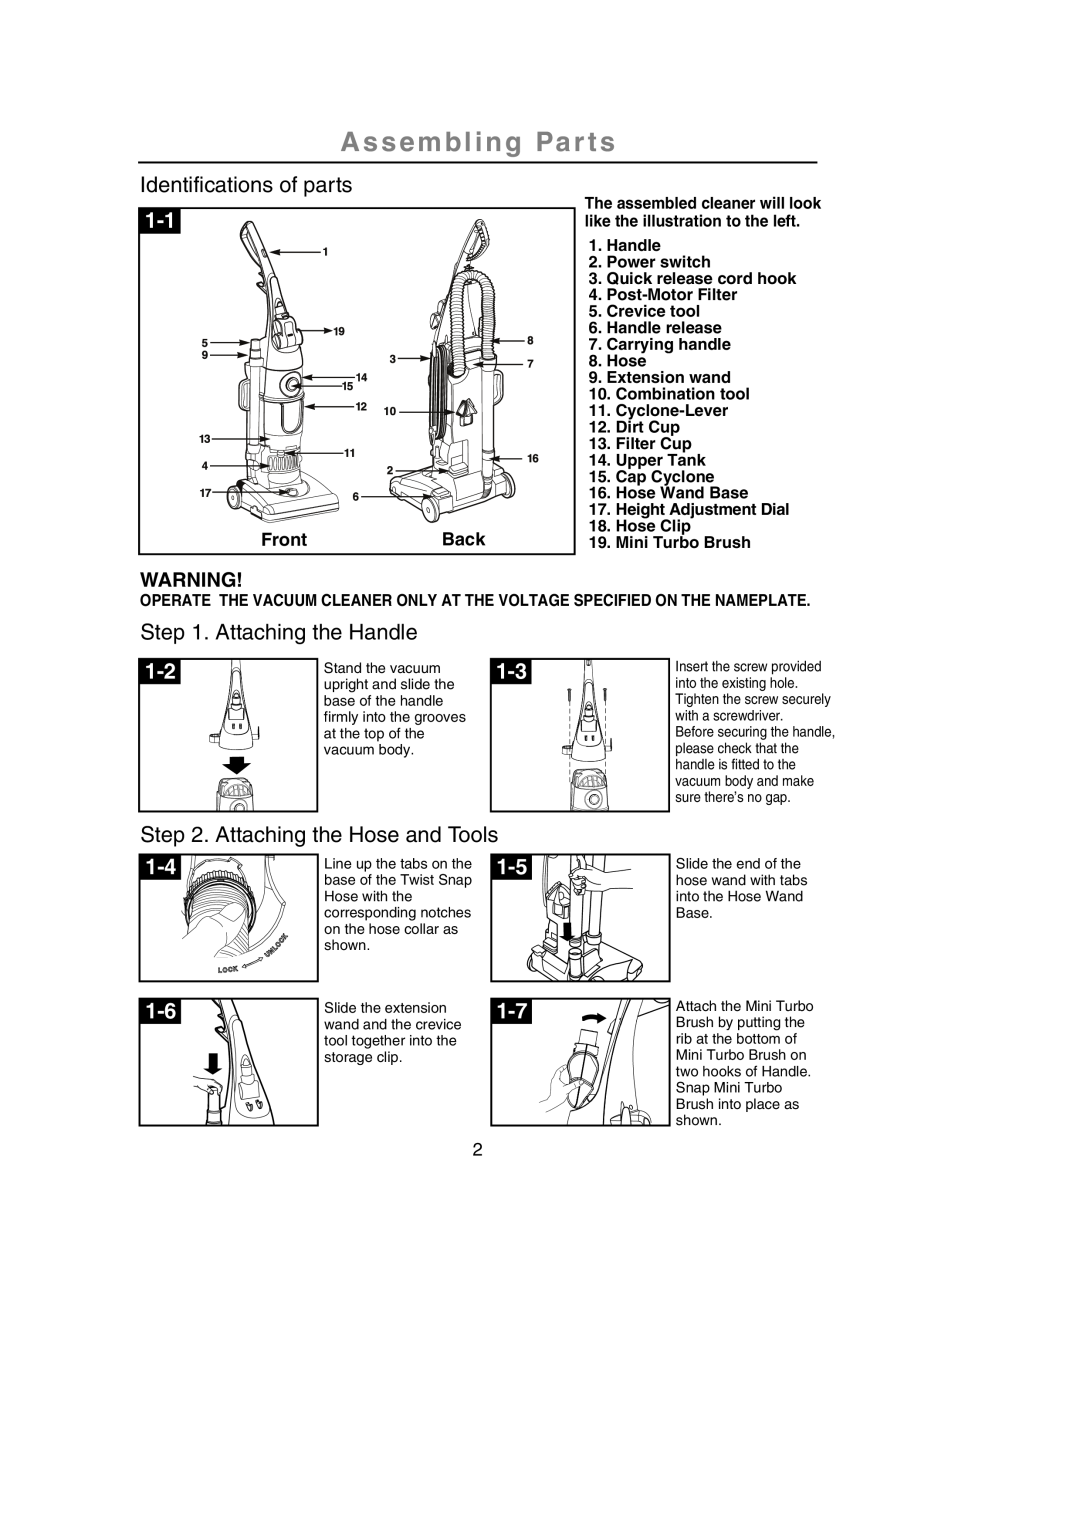 Samsung SU-2950 Series Assembling Par ts, Identifications of parts, Attaching the Handle, Attaching the Hose and Tools 